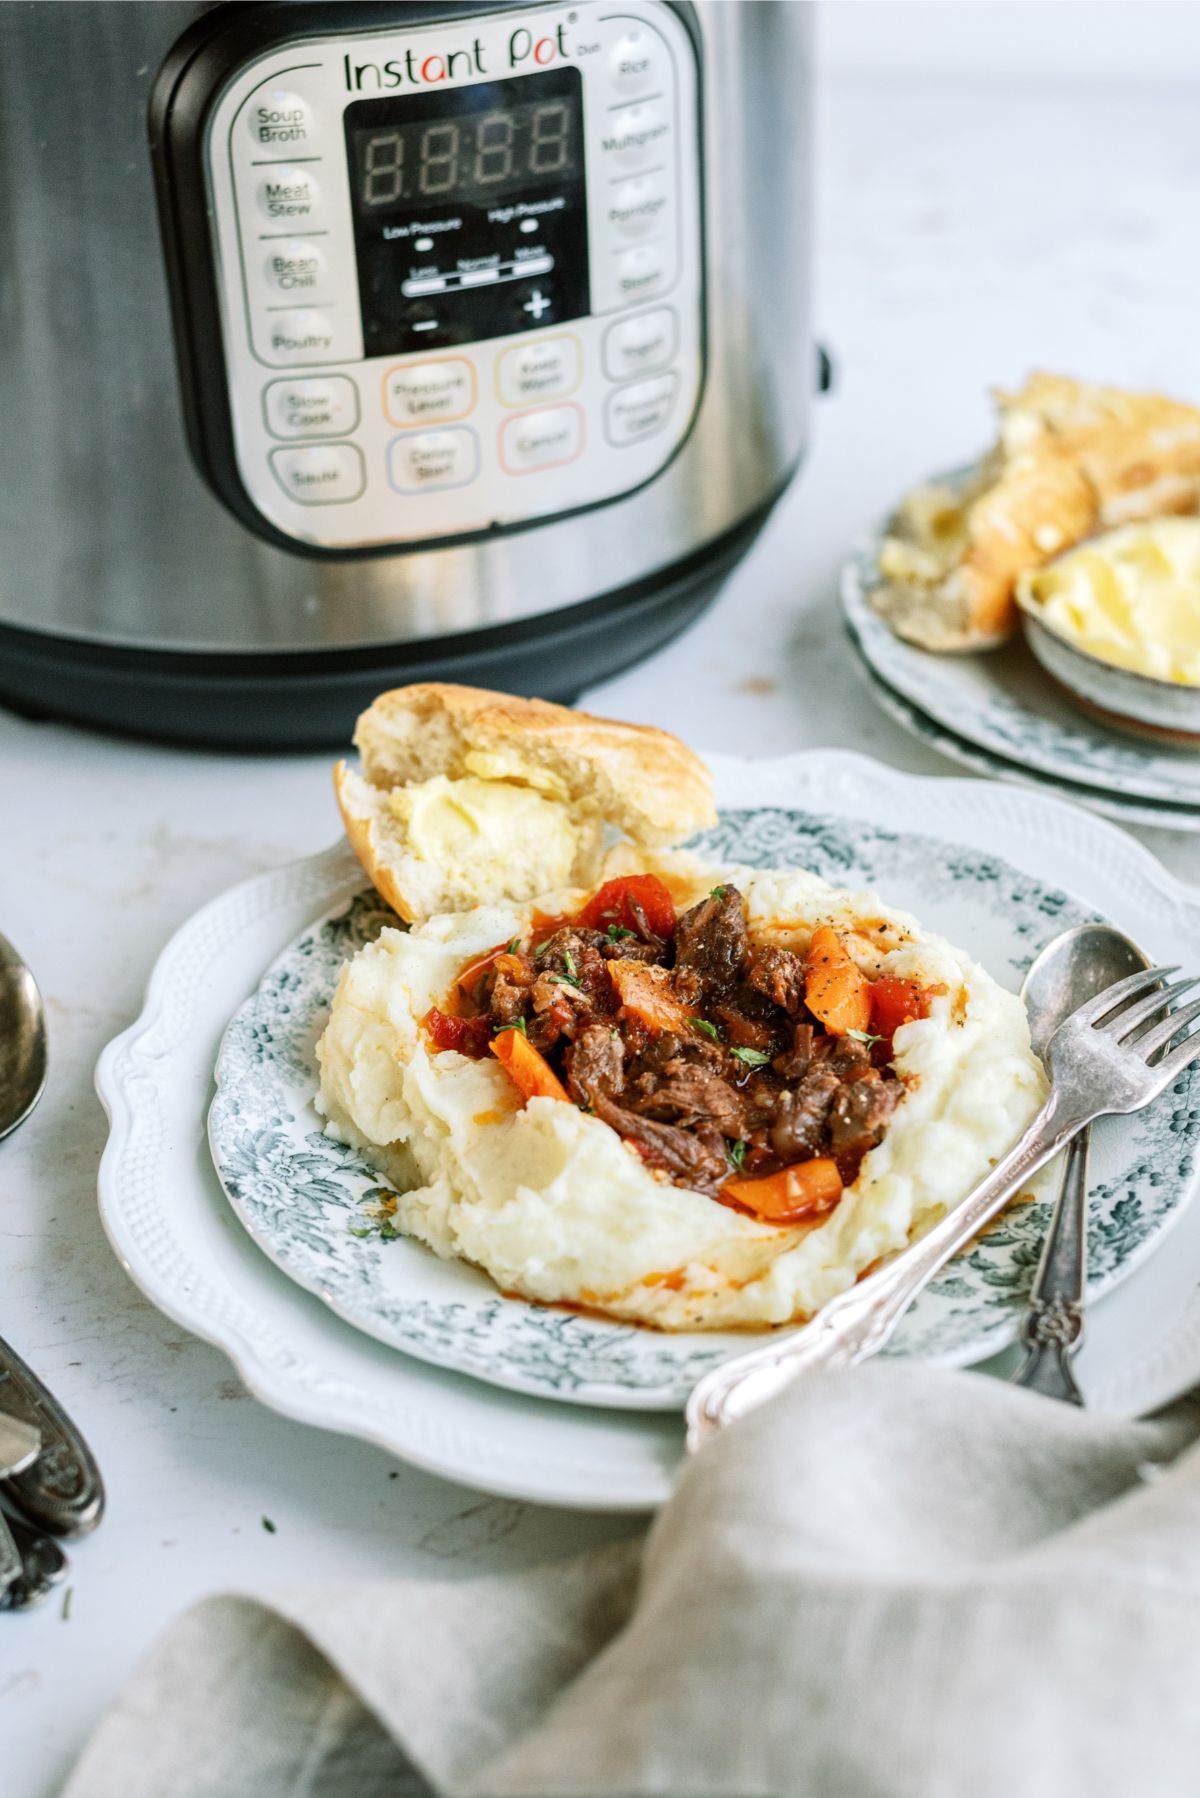 Instant Pot Beef Daube Stew with Mashed Potatoes on a plate with the Instant Pot in the background